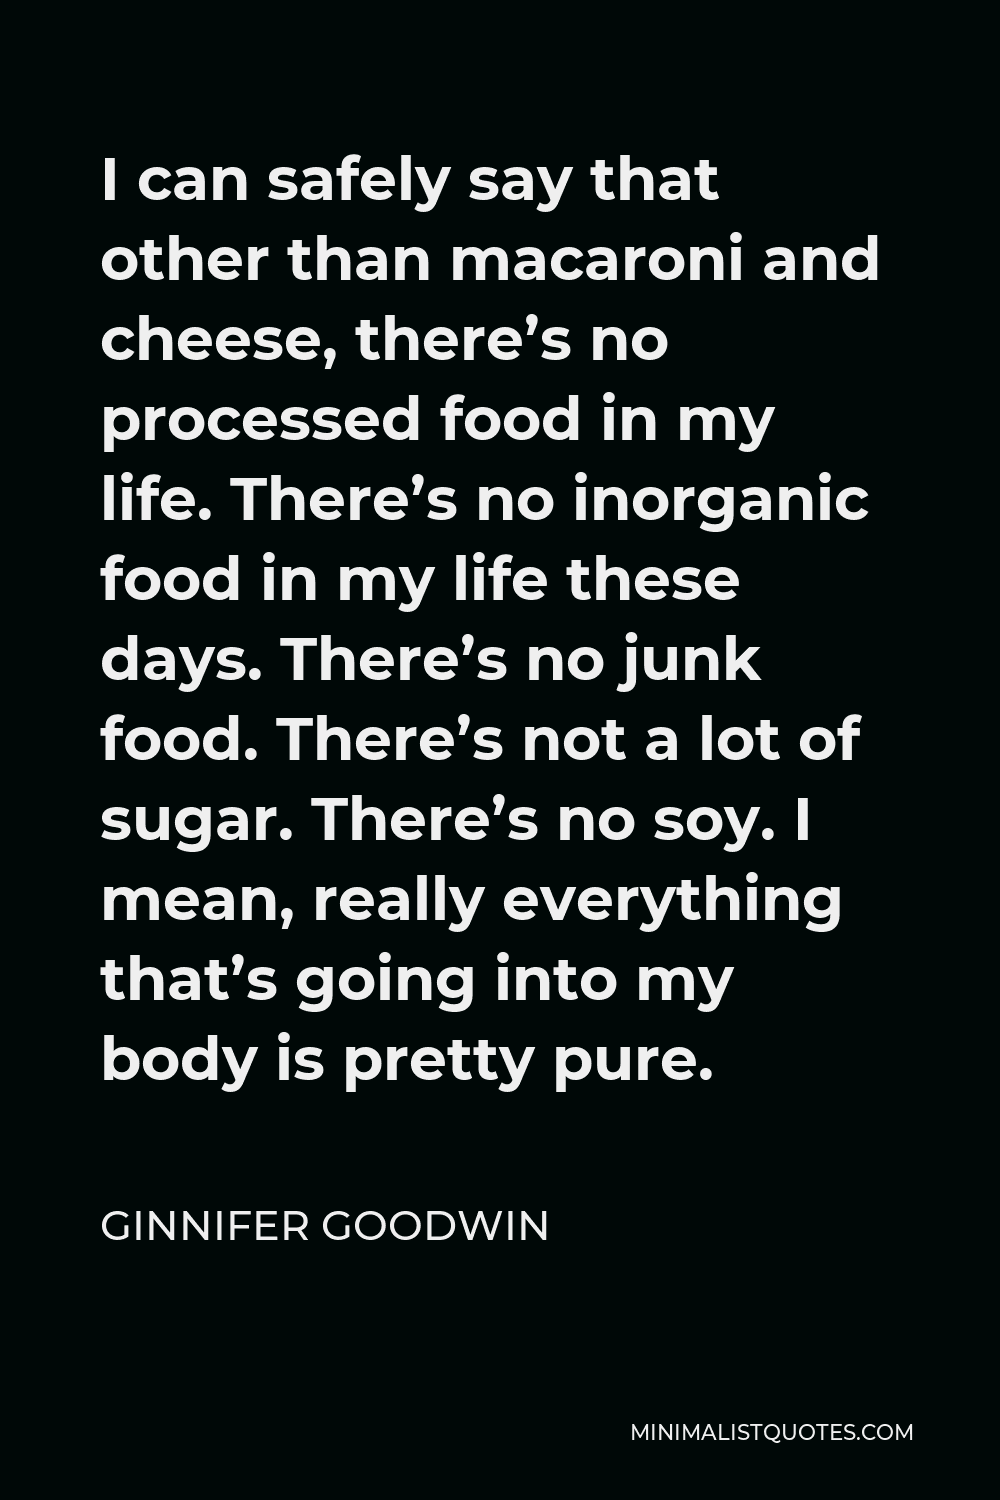 Ginnifer Goodwin Quote - I can safely say that other than macaroni and cheese, there’s no processed food in my life. There’s no inorganic food in my life these days. There’s no junk food. There’s not a lot of sugar. There’s no soy. I mean, really everything that’s going into my body is pretty pure.